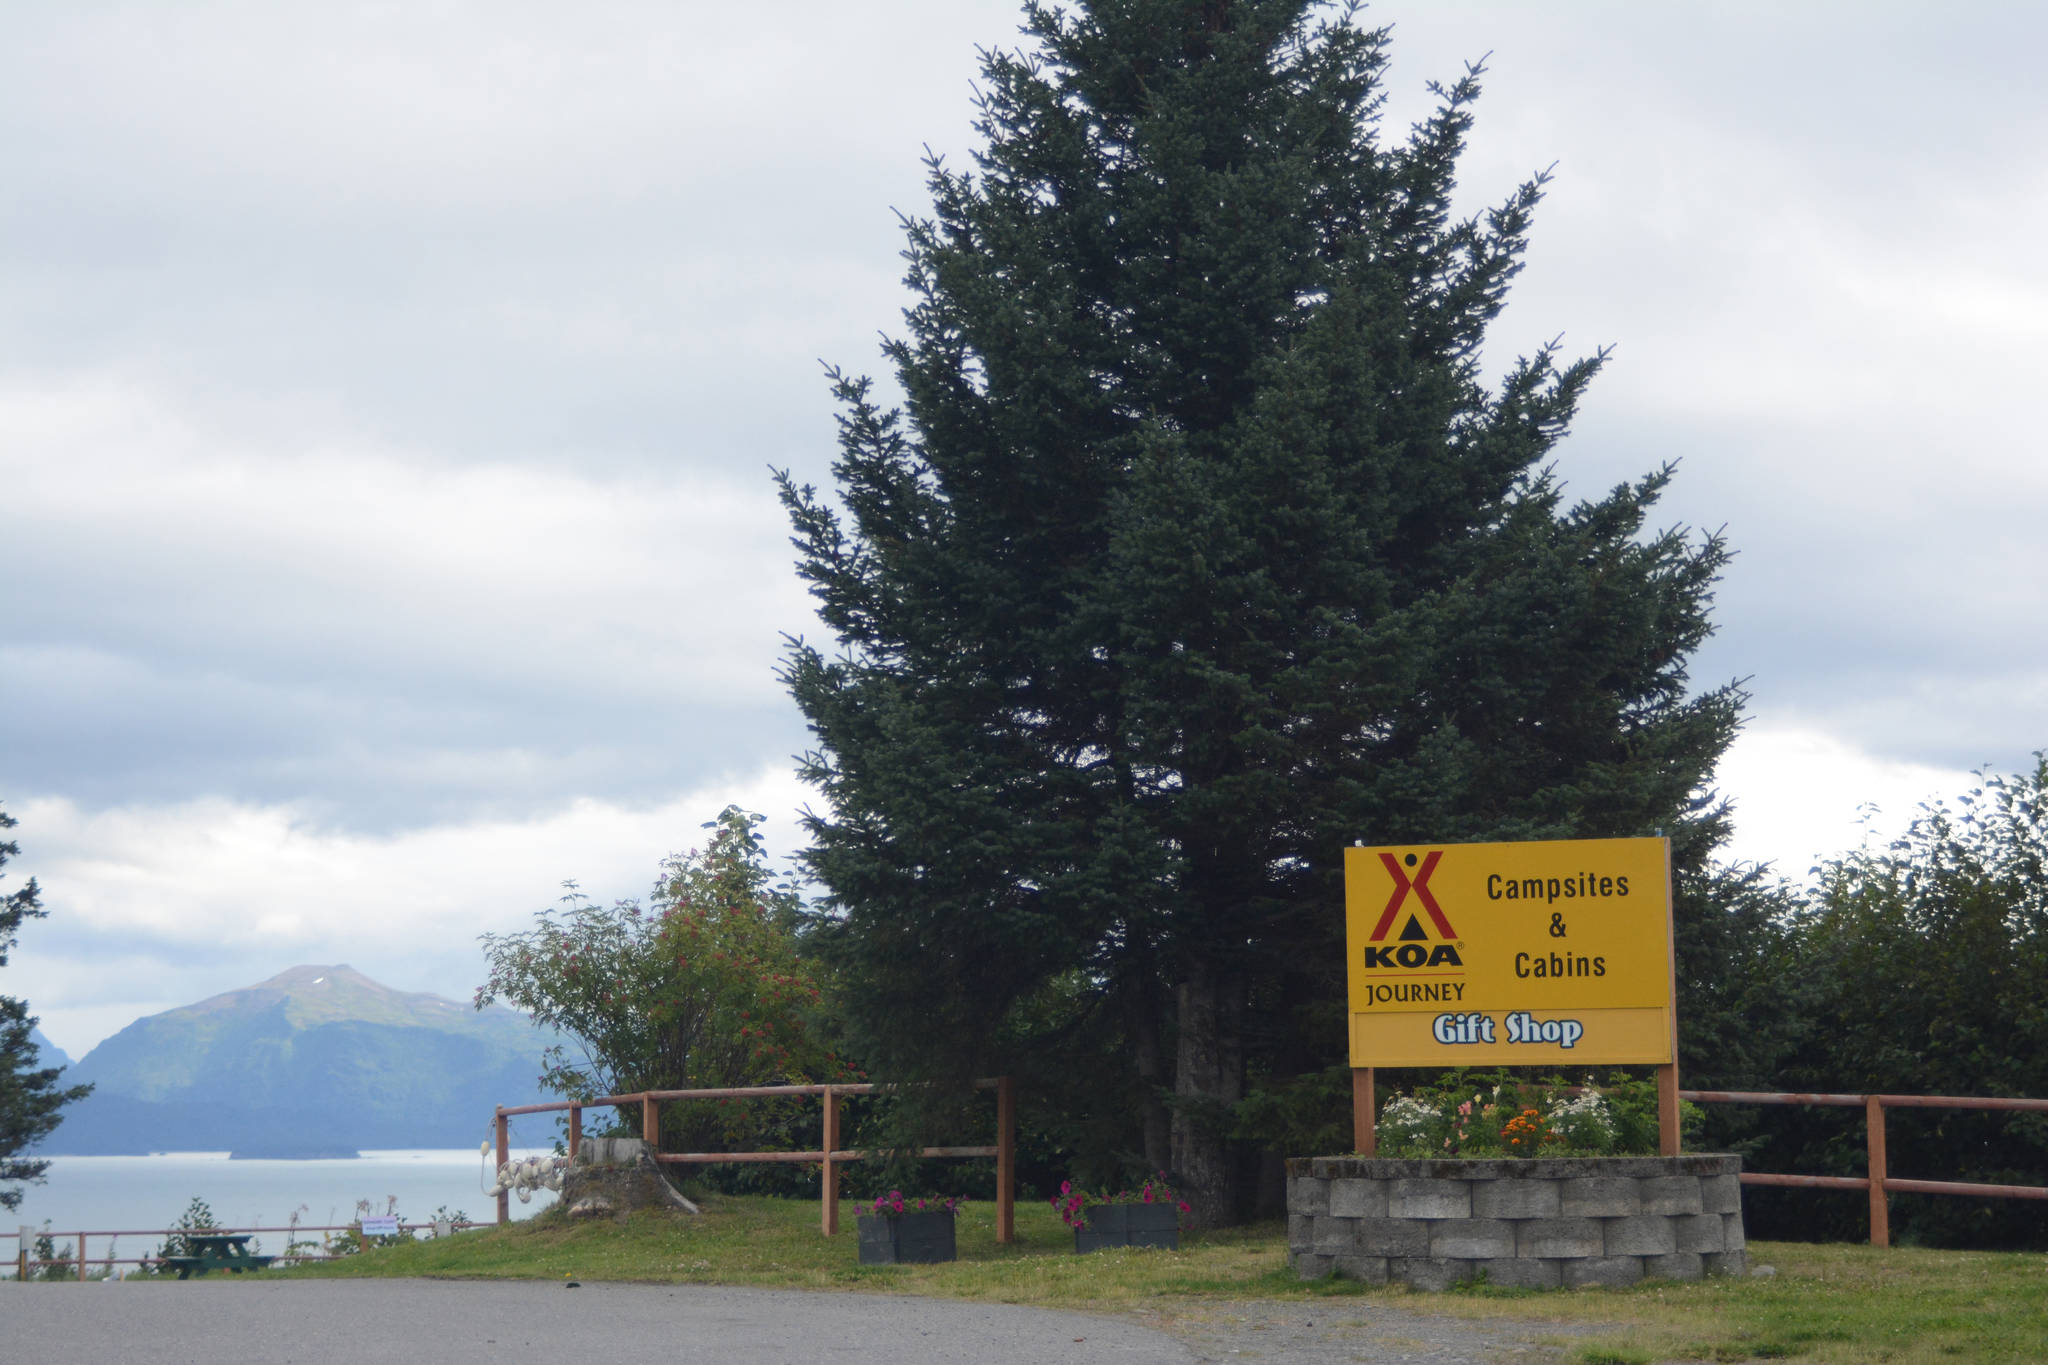 The Homer/Baycrest KOA Campground, as seen on Aug. 18, 2018, near Baycrest Hill in Homer, Alaska. Formerly the Baycrest RV Park, owners Shelly and Jeff Erickson made it a KOA campground in the fall of 2017. (Photo by Michael Armstrong/Homer News)